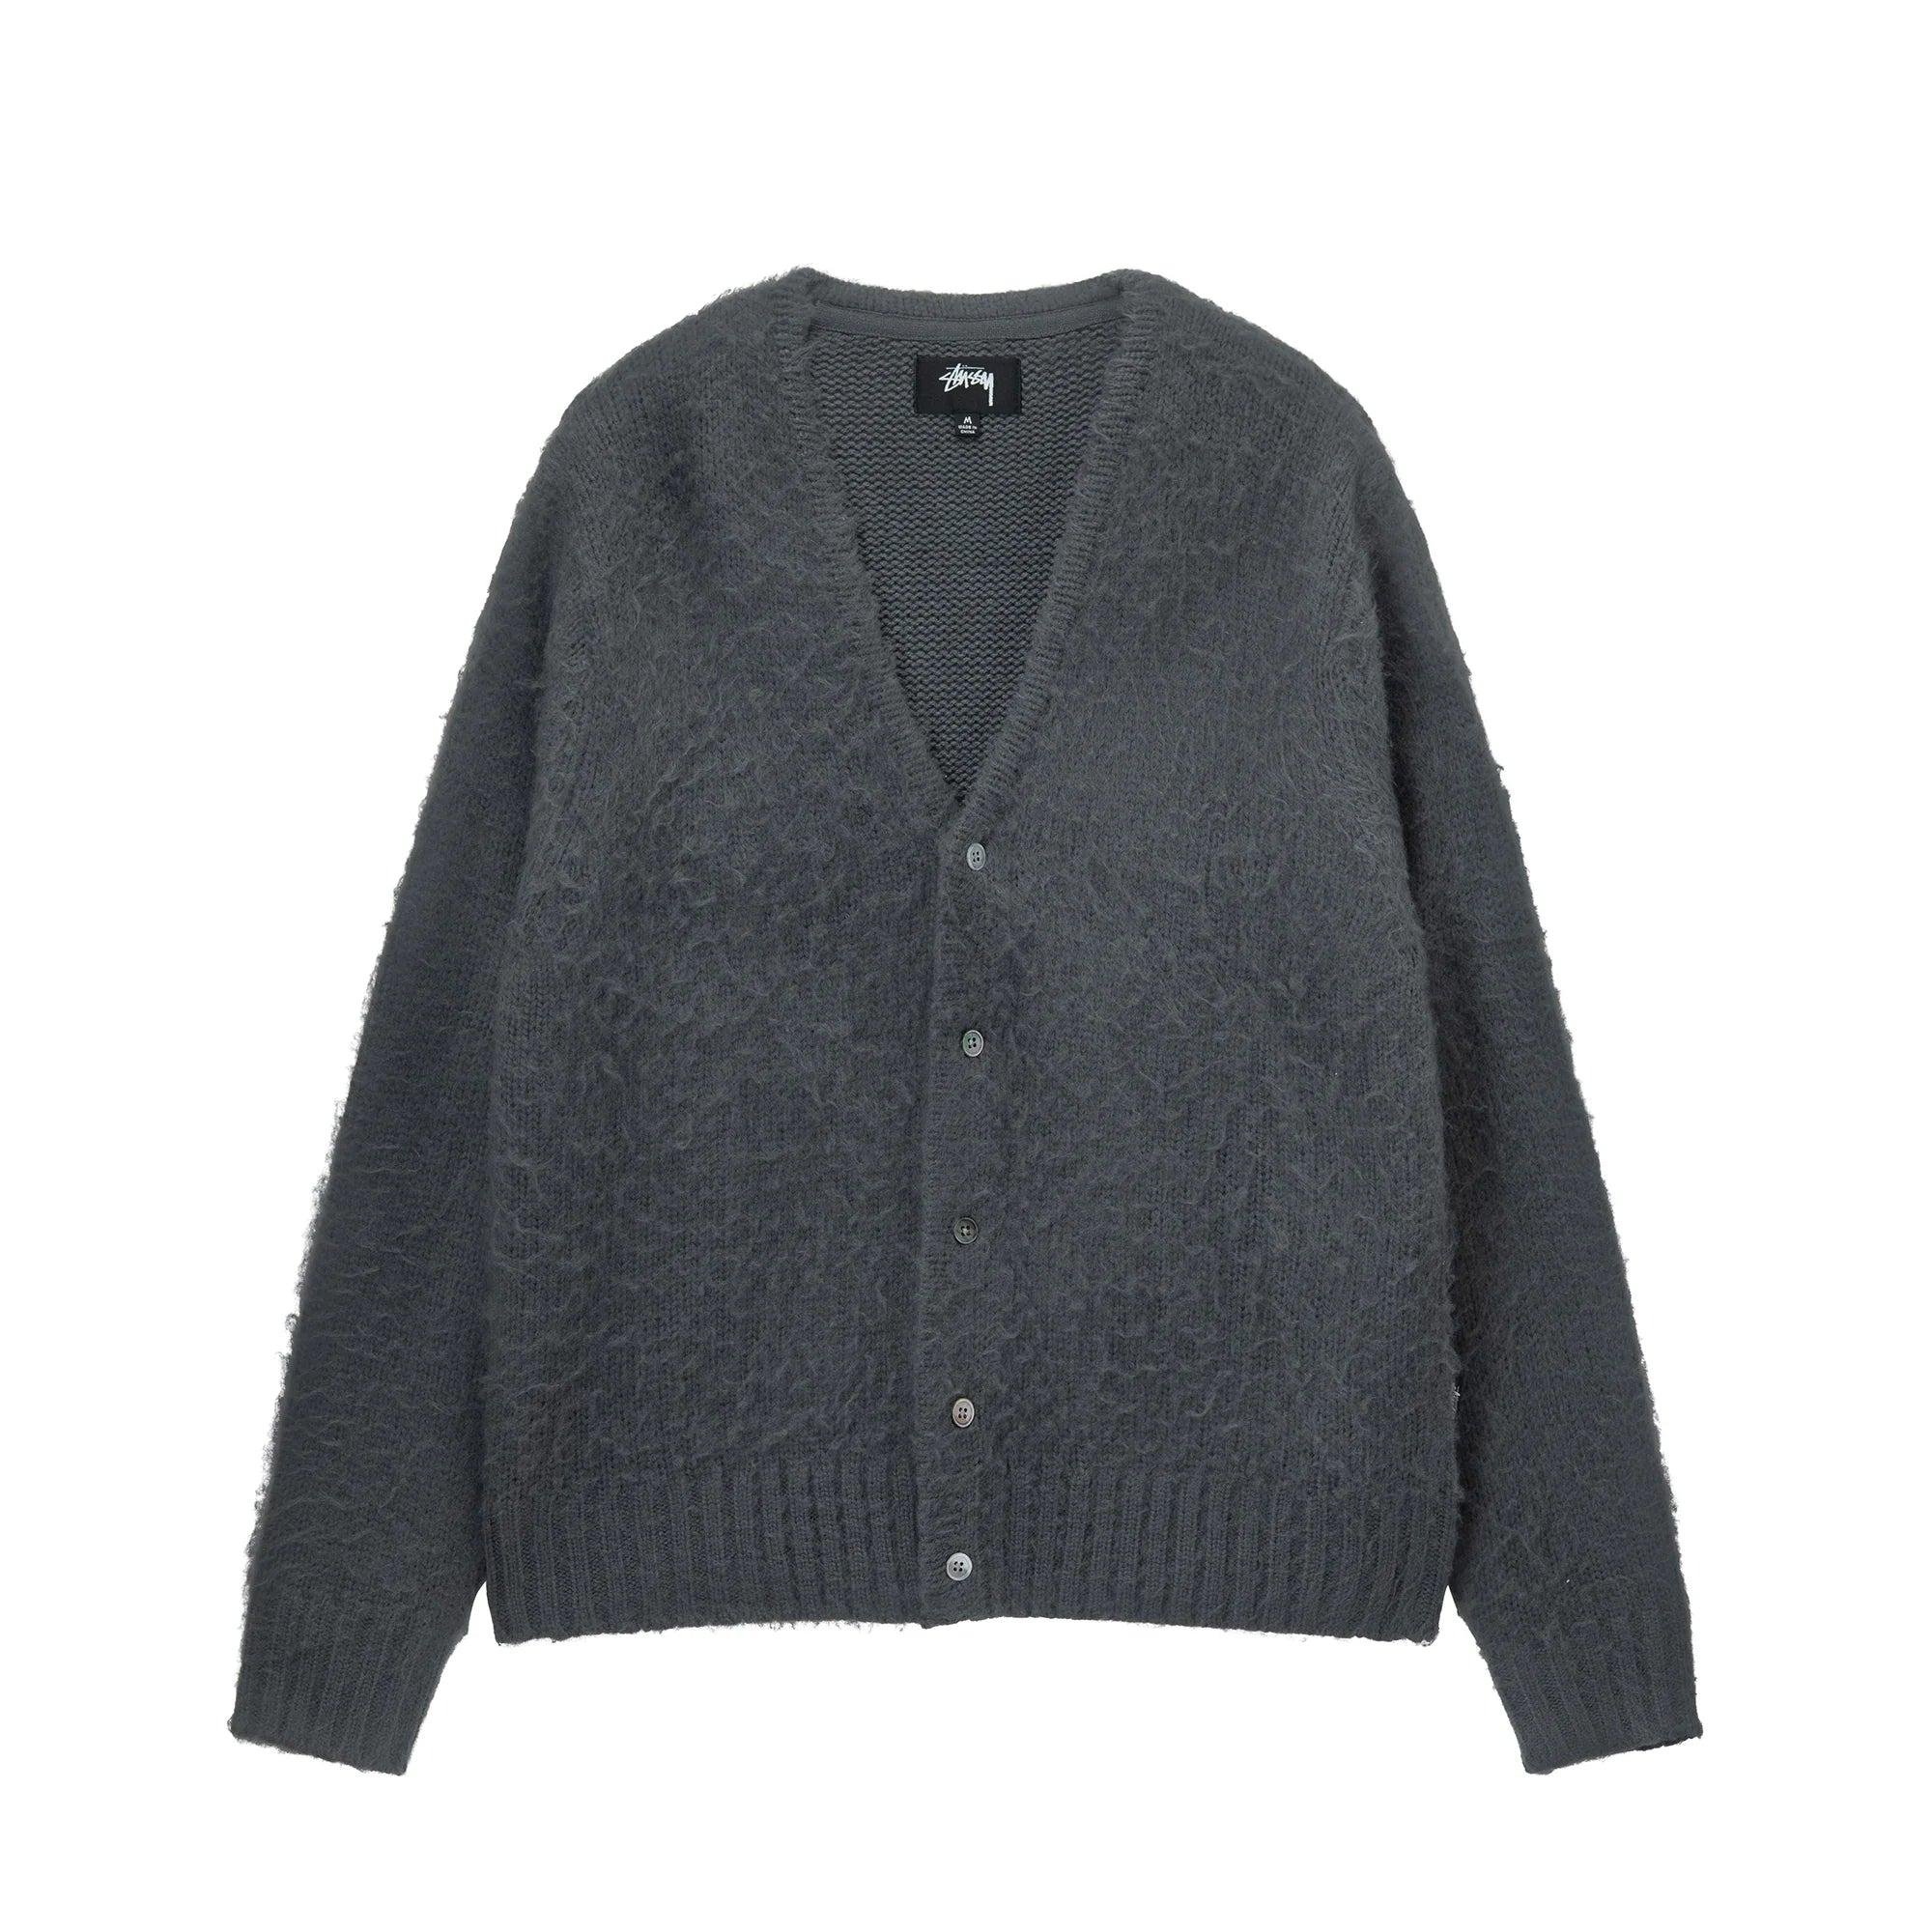 Stüssy Brushed Cardigan (Charcoal) by STUSSY | jellibeans